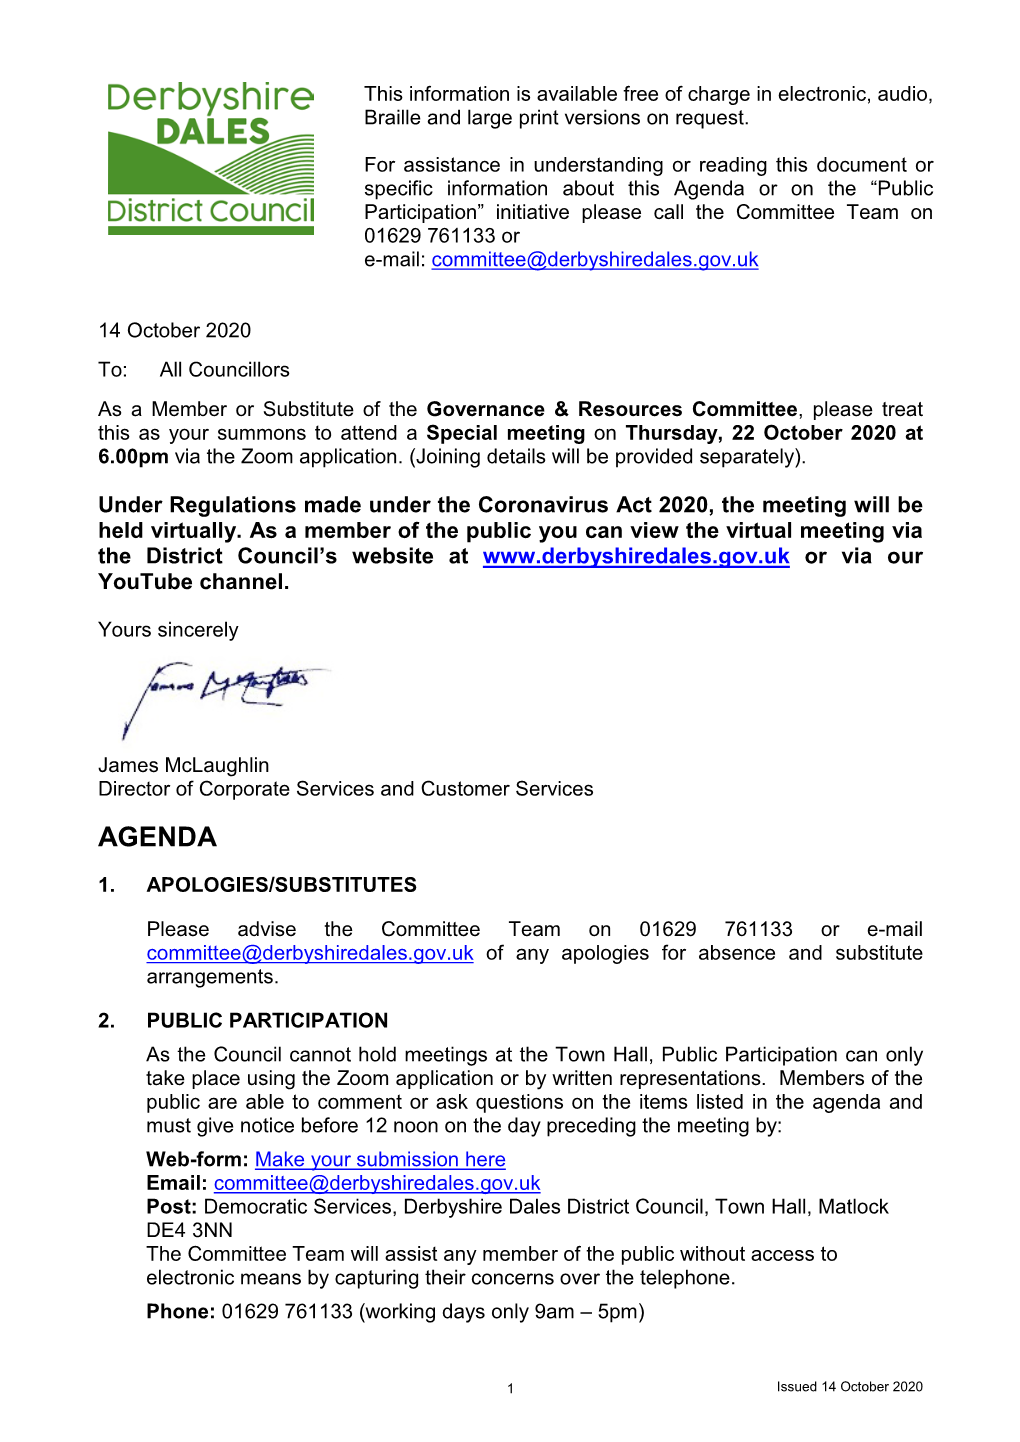 Agenda Or on the “Public Participation” Initiative Please Call the Committee Team on 01629 761133 Or E-Mail: Committee@Derbyshiredales.Gov.Uk 14 October 2020